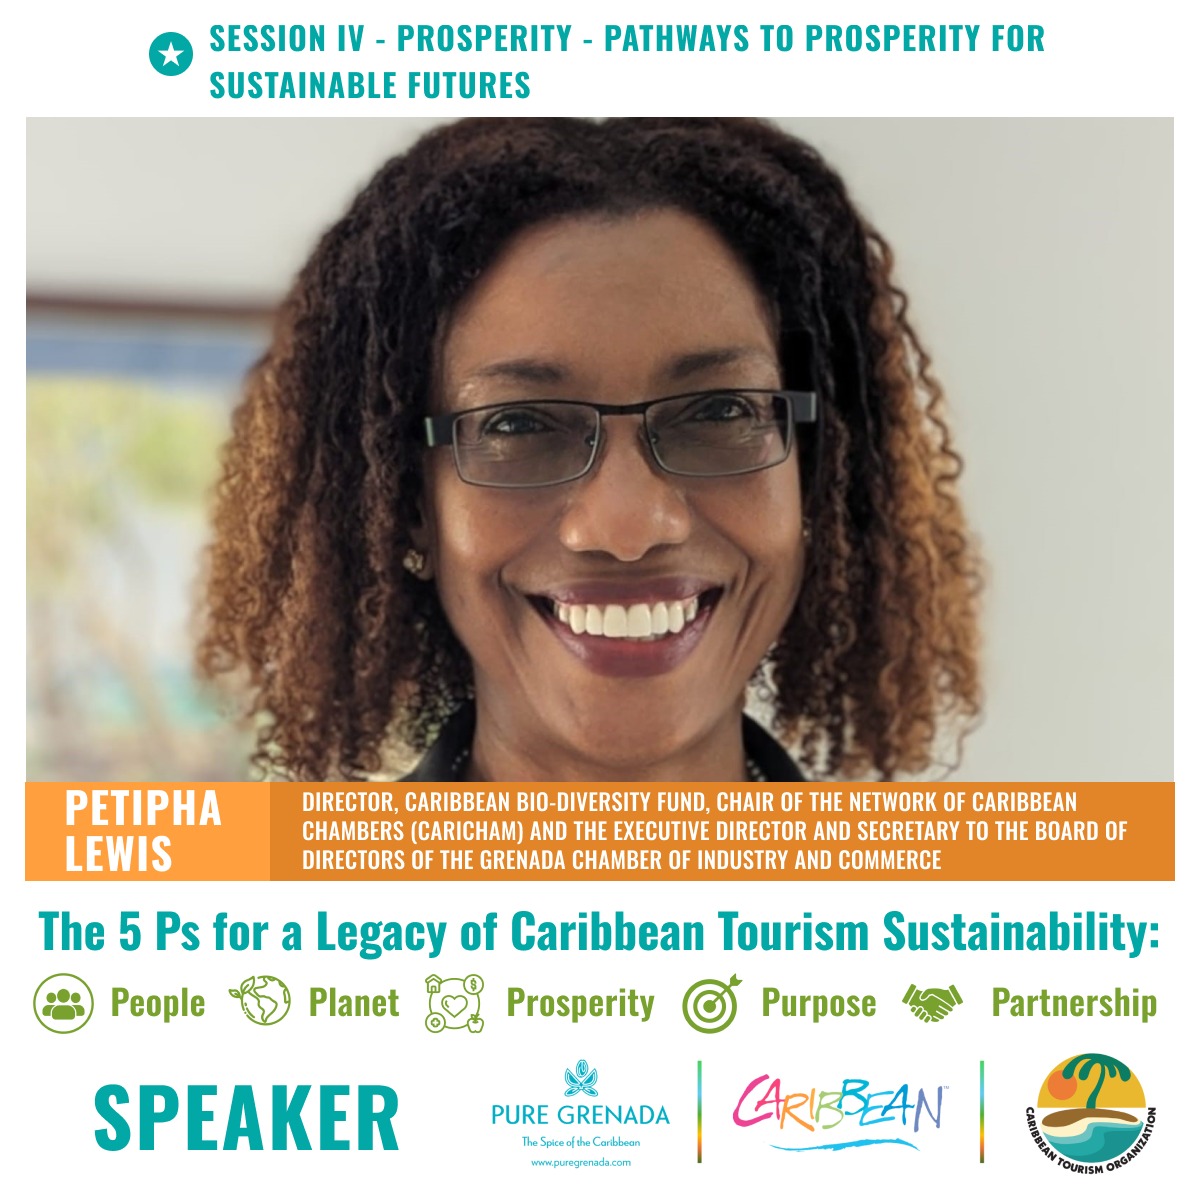 Grenadian Petipha Lewis, Board Director of the Caribbean Biodiversity Fund, will join a world-class group of panelists to discuss the realities of financing sustainable tourism initiatives. caribbeanstc.com/session/prospe… @caribbiofund